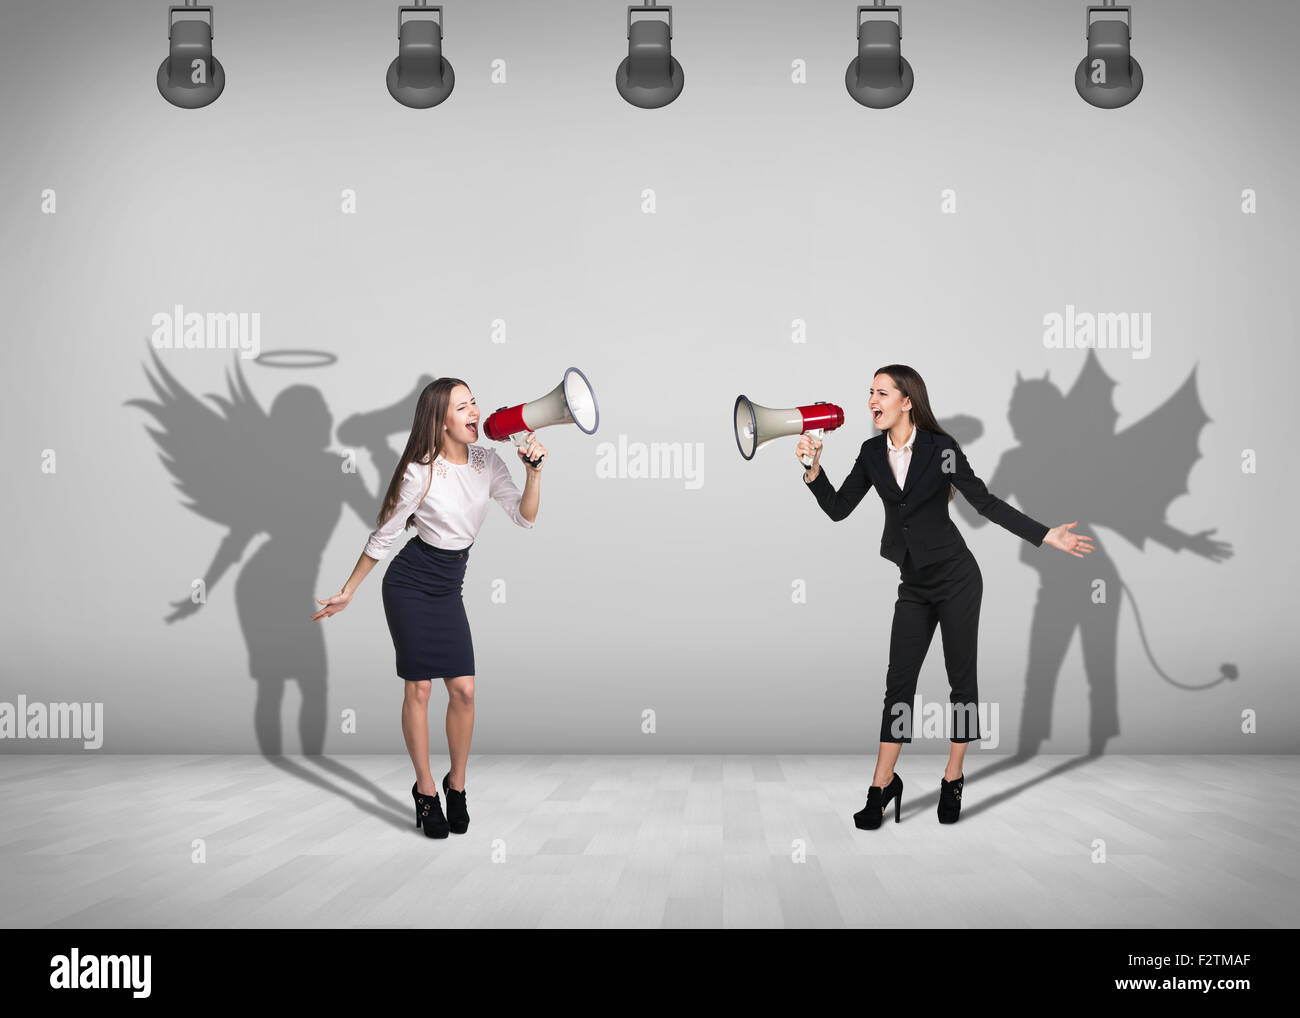 Businesswomen stands with shadow on the wall Stock Photo